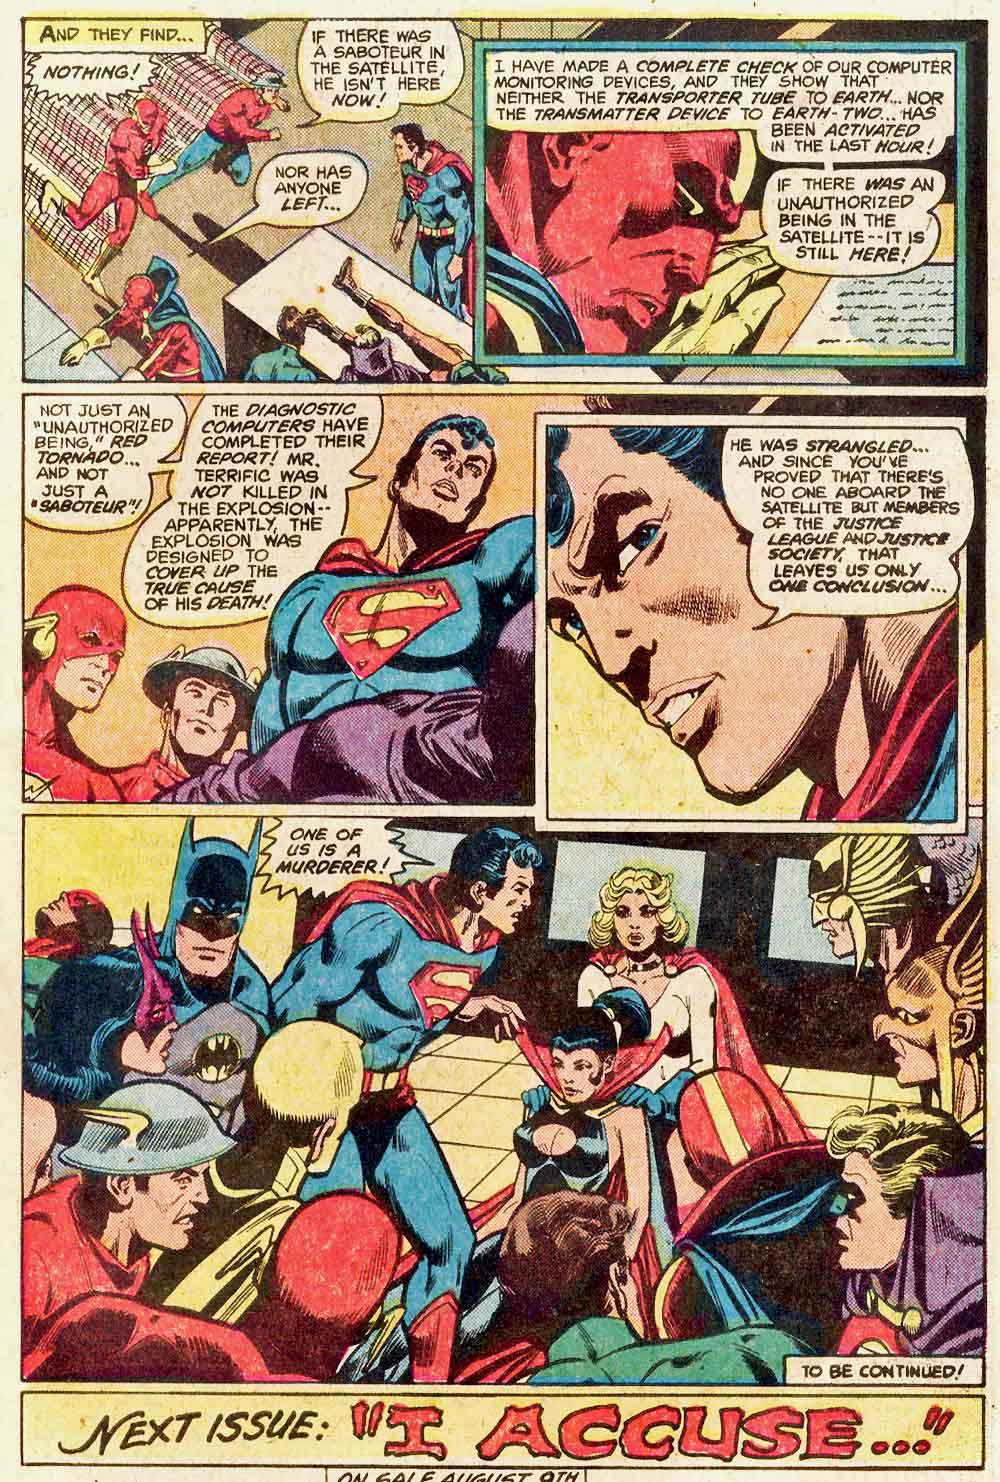 Justice League of America #171 by Gerry Conway, Dick Dillin, and Frank McLaughlin